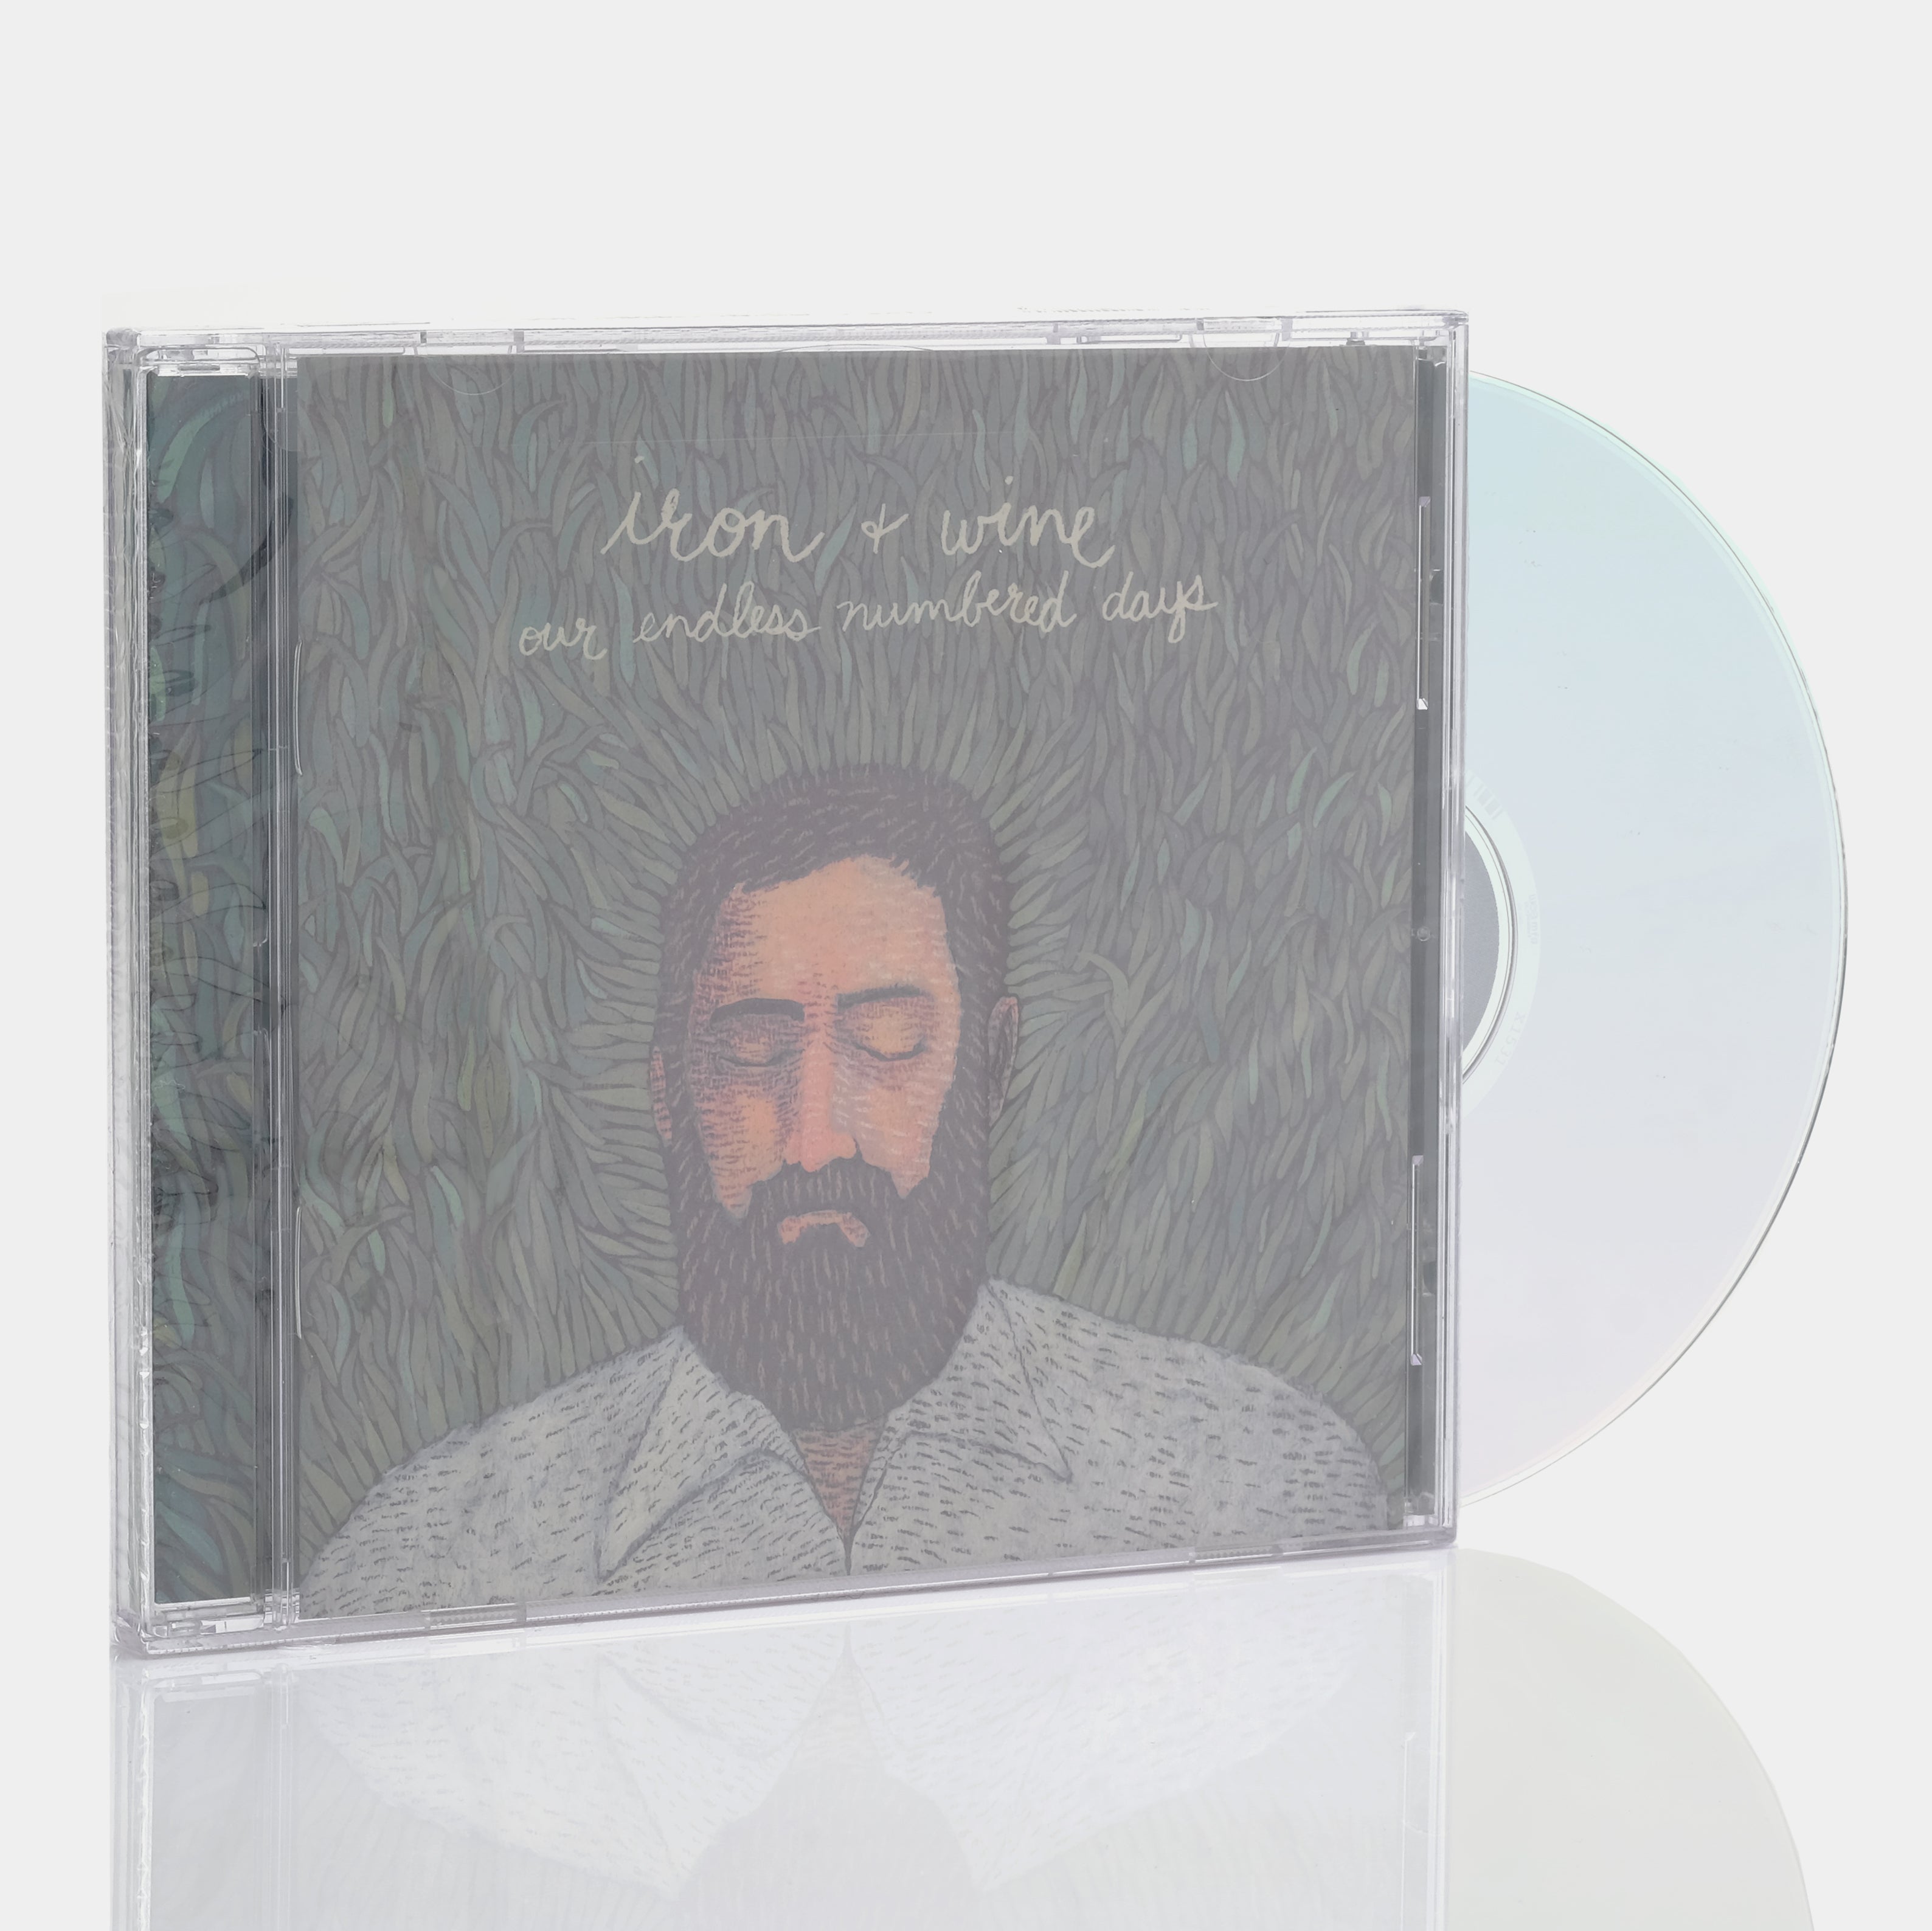 Iron & Wine - Our Endless Numbered Days CD